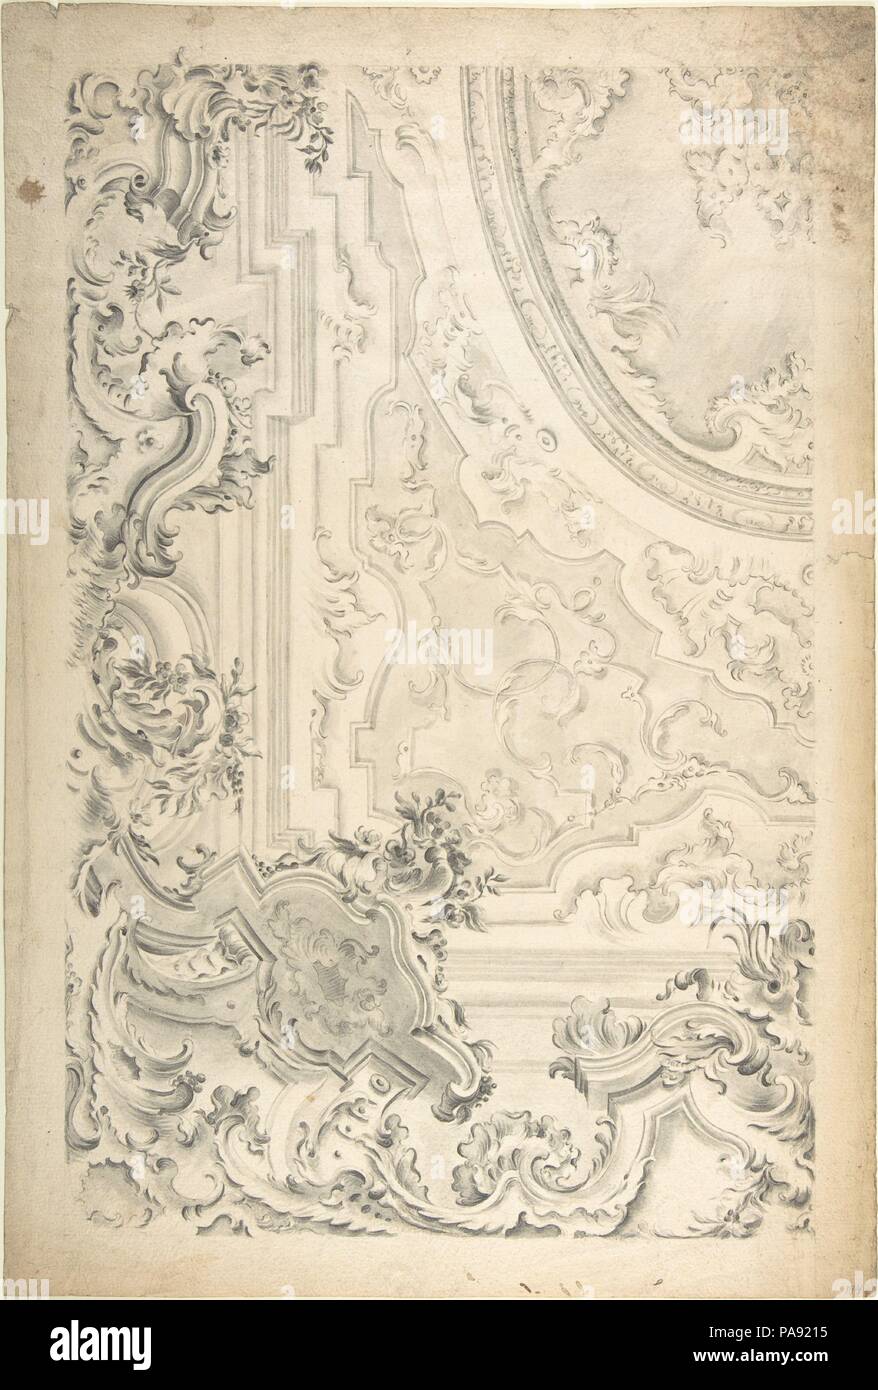 Design for a Ceiling with Cove Showing. Artist: Anonymous, Italian, Piedmontese, 18th century. Dimensions: 17 5/16 x 11 3/4 in. (44 x 29.8 cm). Date: 1700-1780. Museum: Metropolitan Museum of Art, New York, USA. Stock Photo